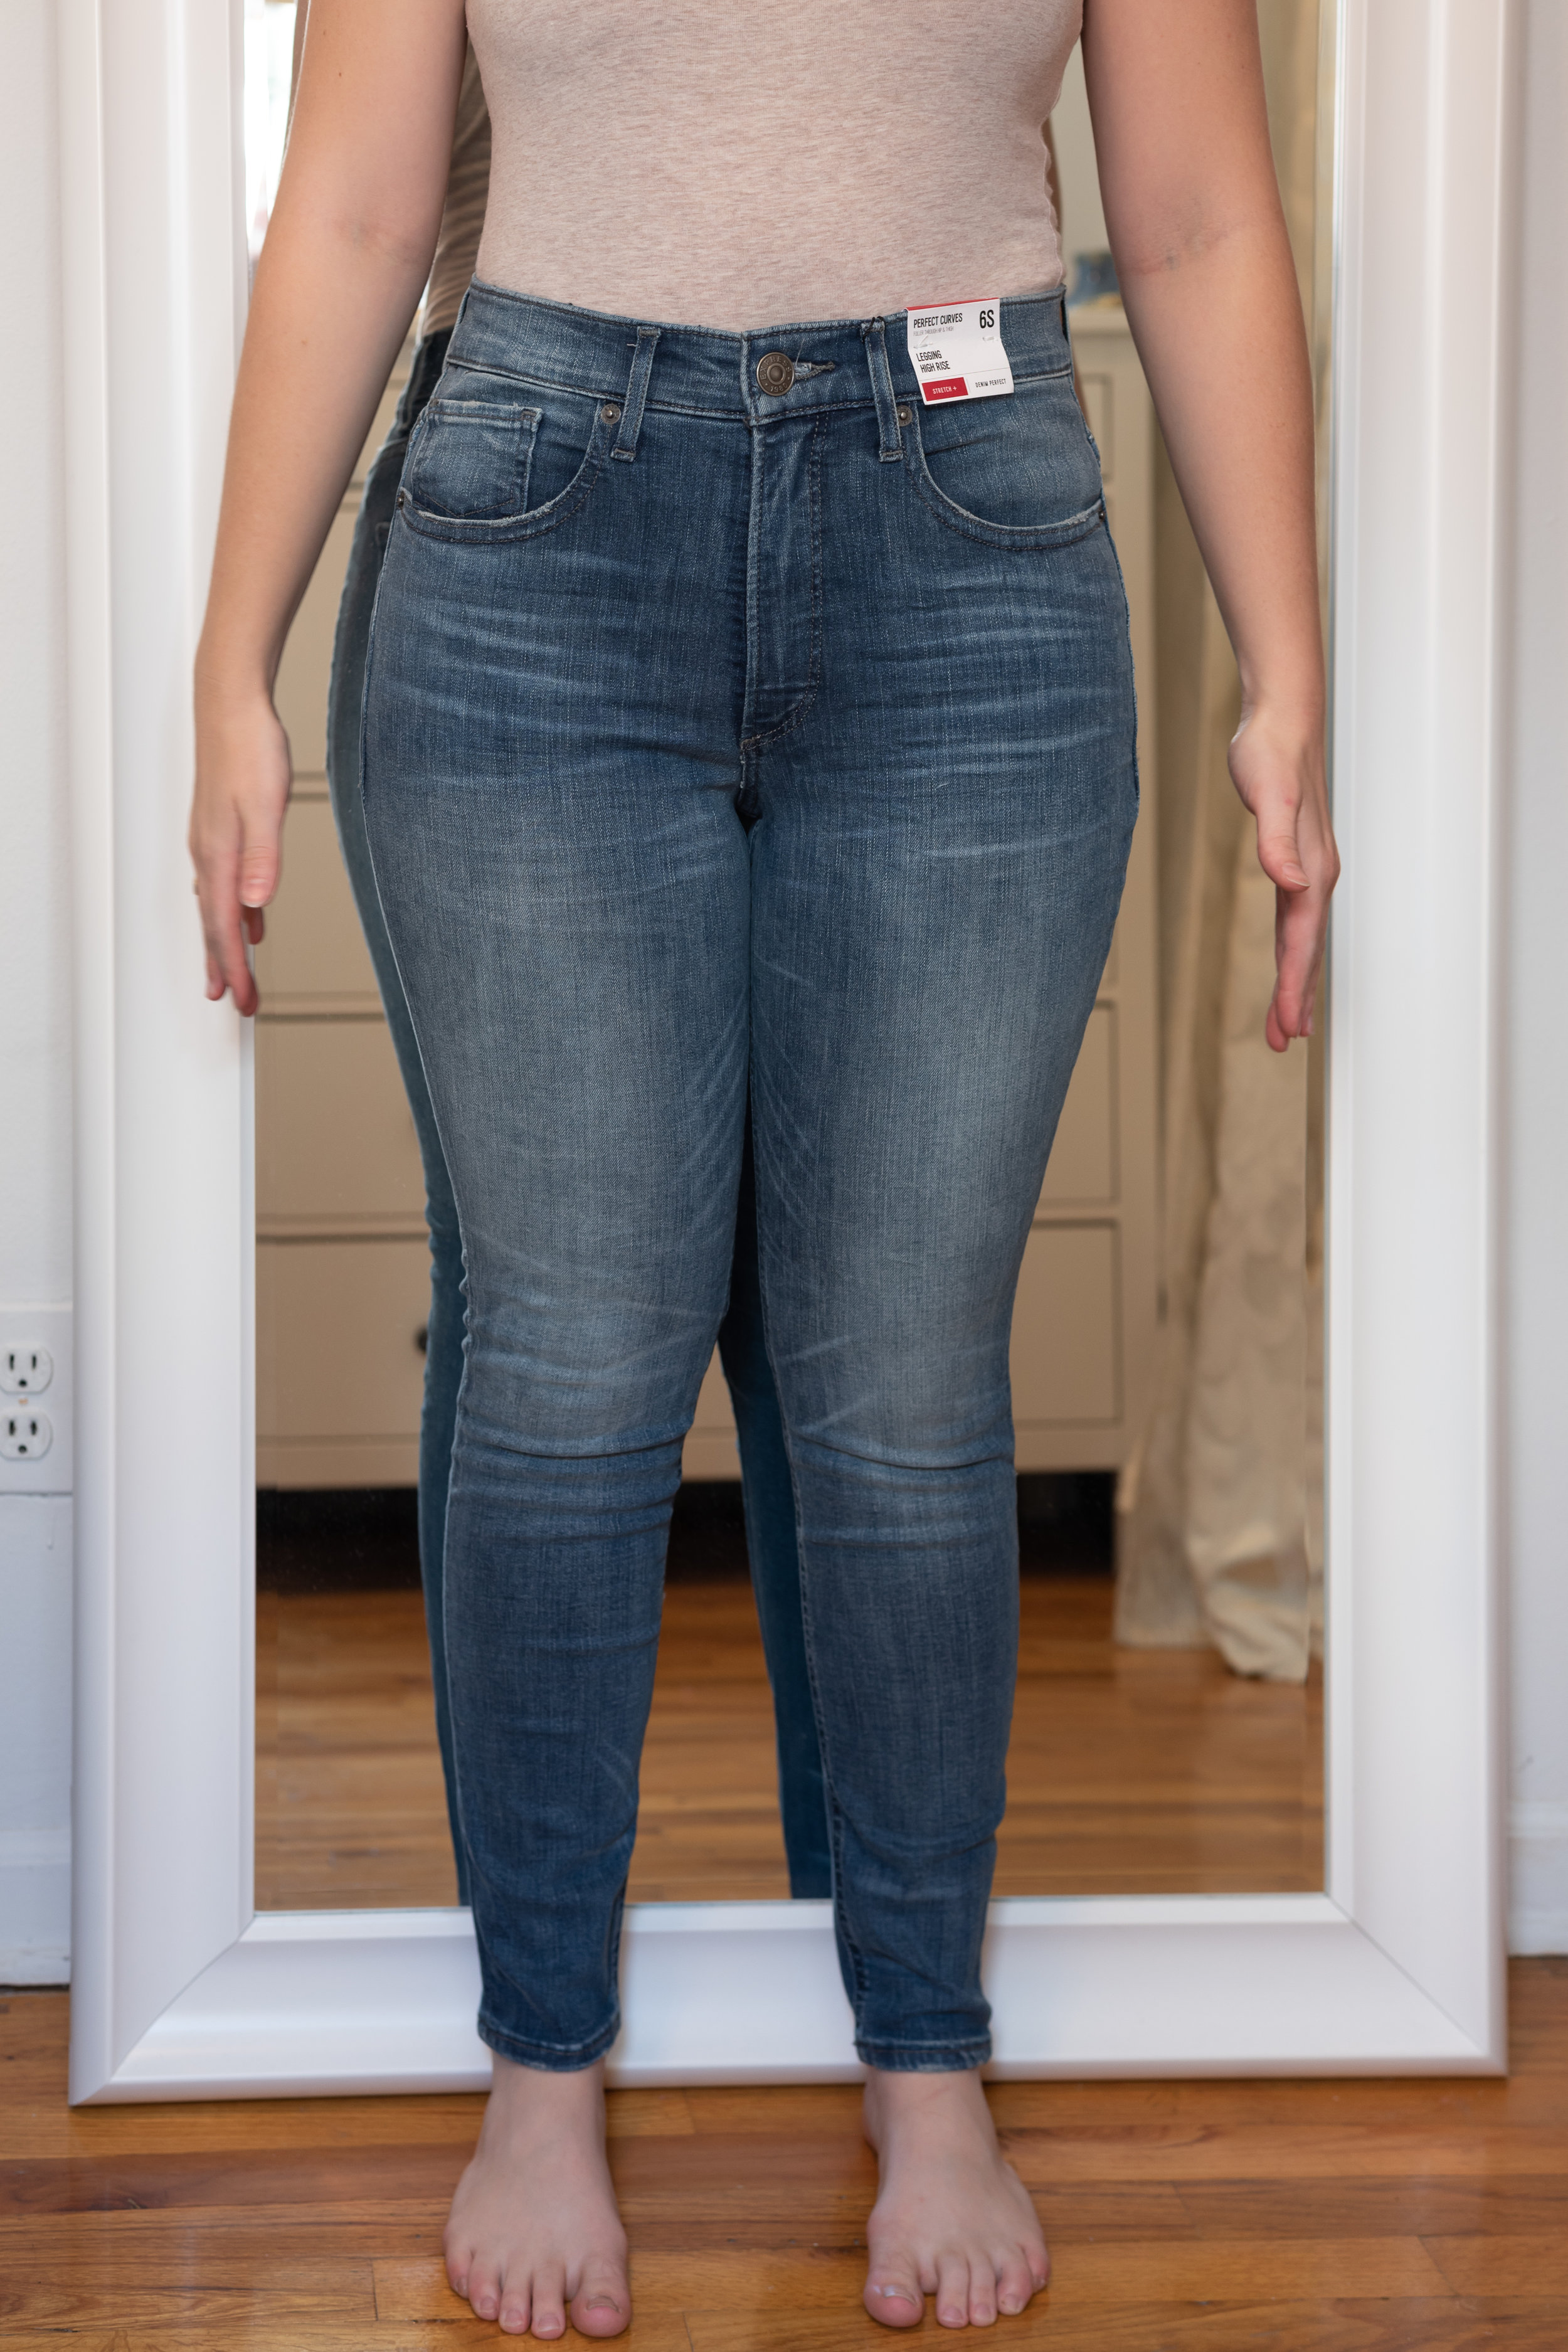 best fitting jeans for pear shaped